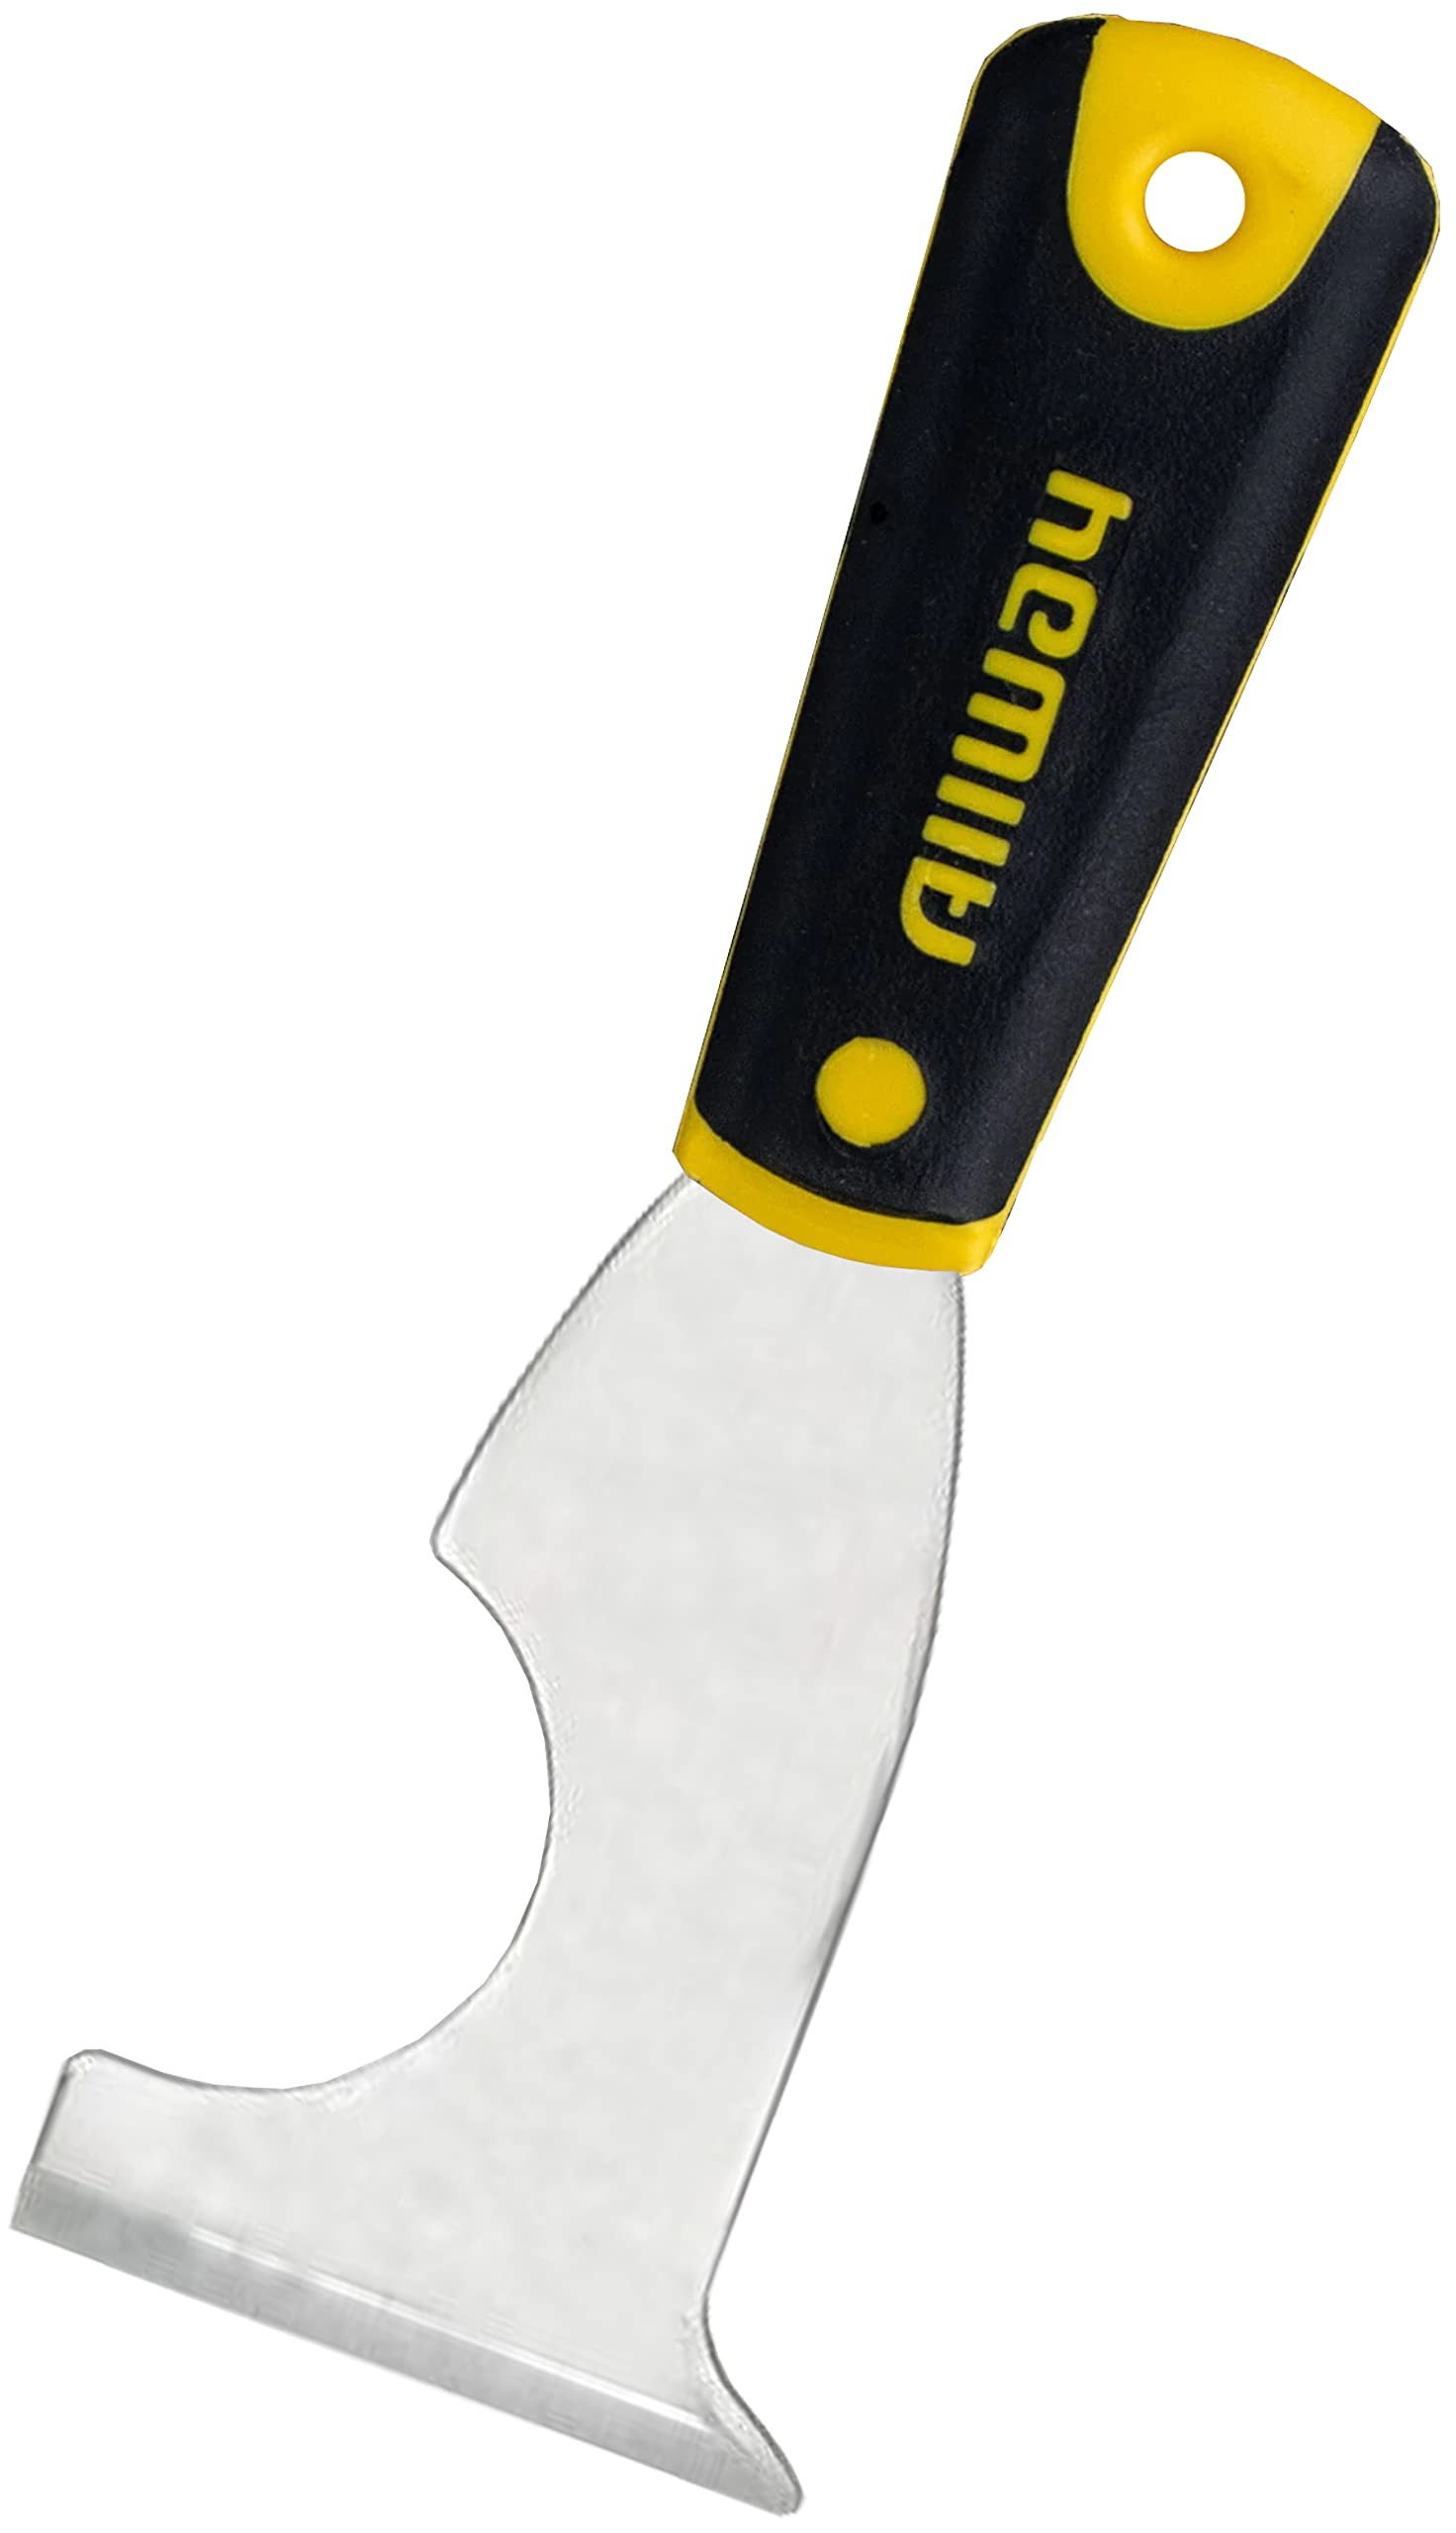 Allway Soft Grip 5-in-1 Painter's Tool $3.25 + Free Shipping w/ Prime or on $35+